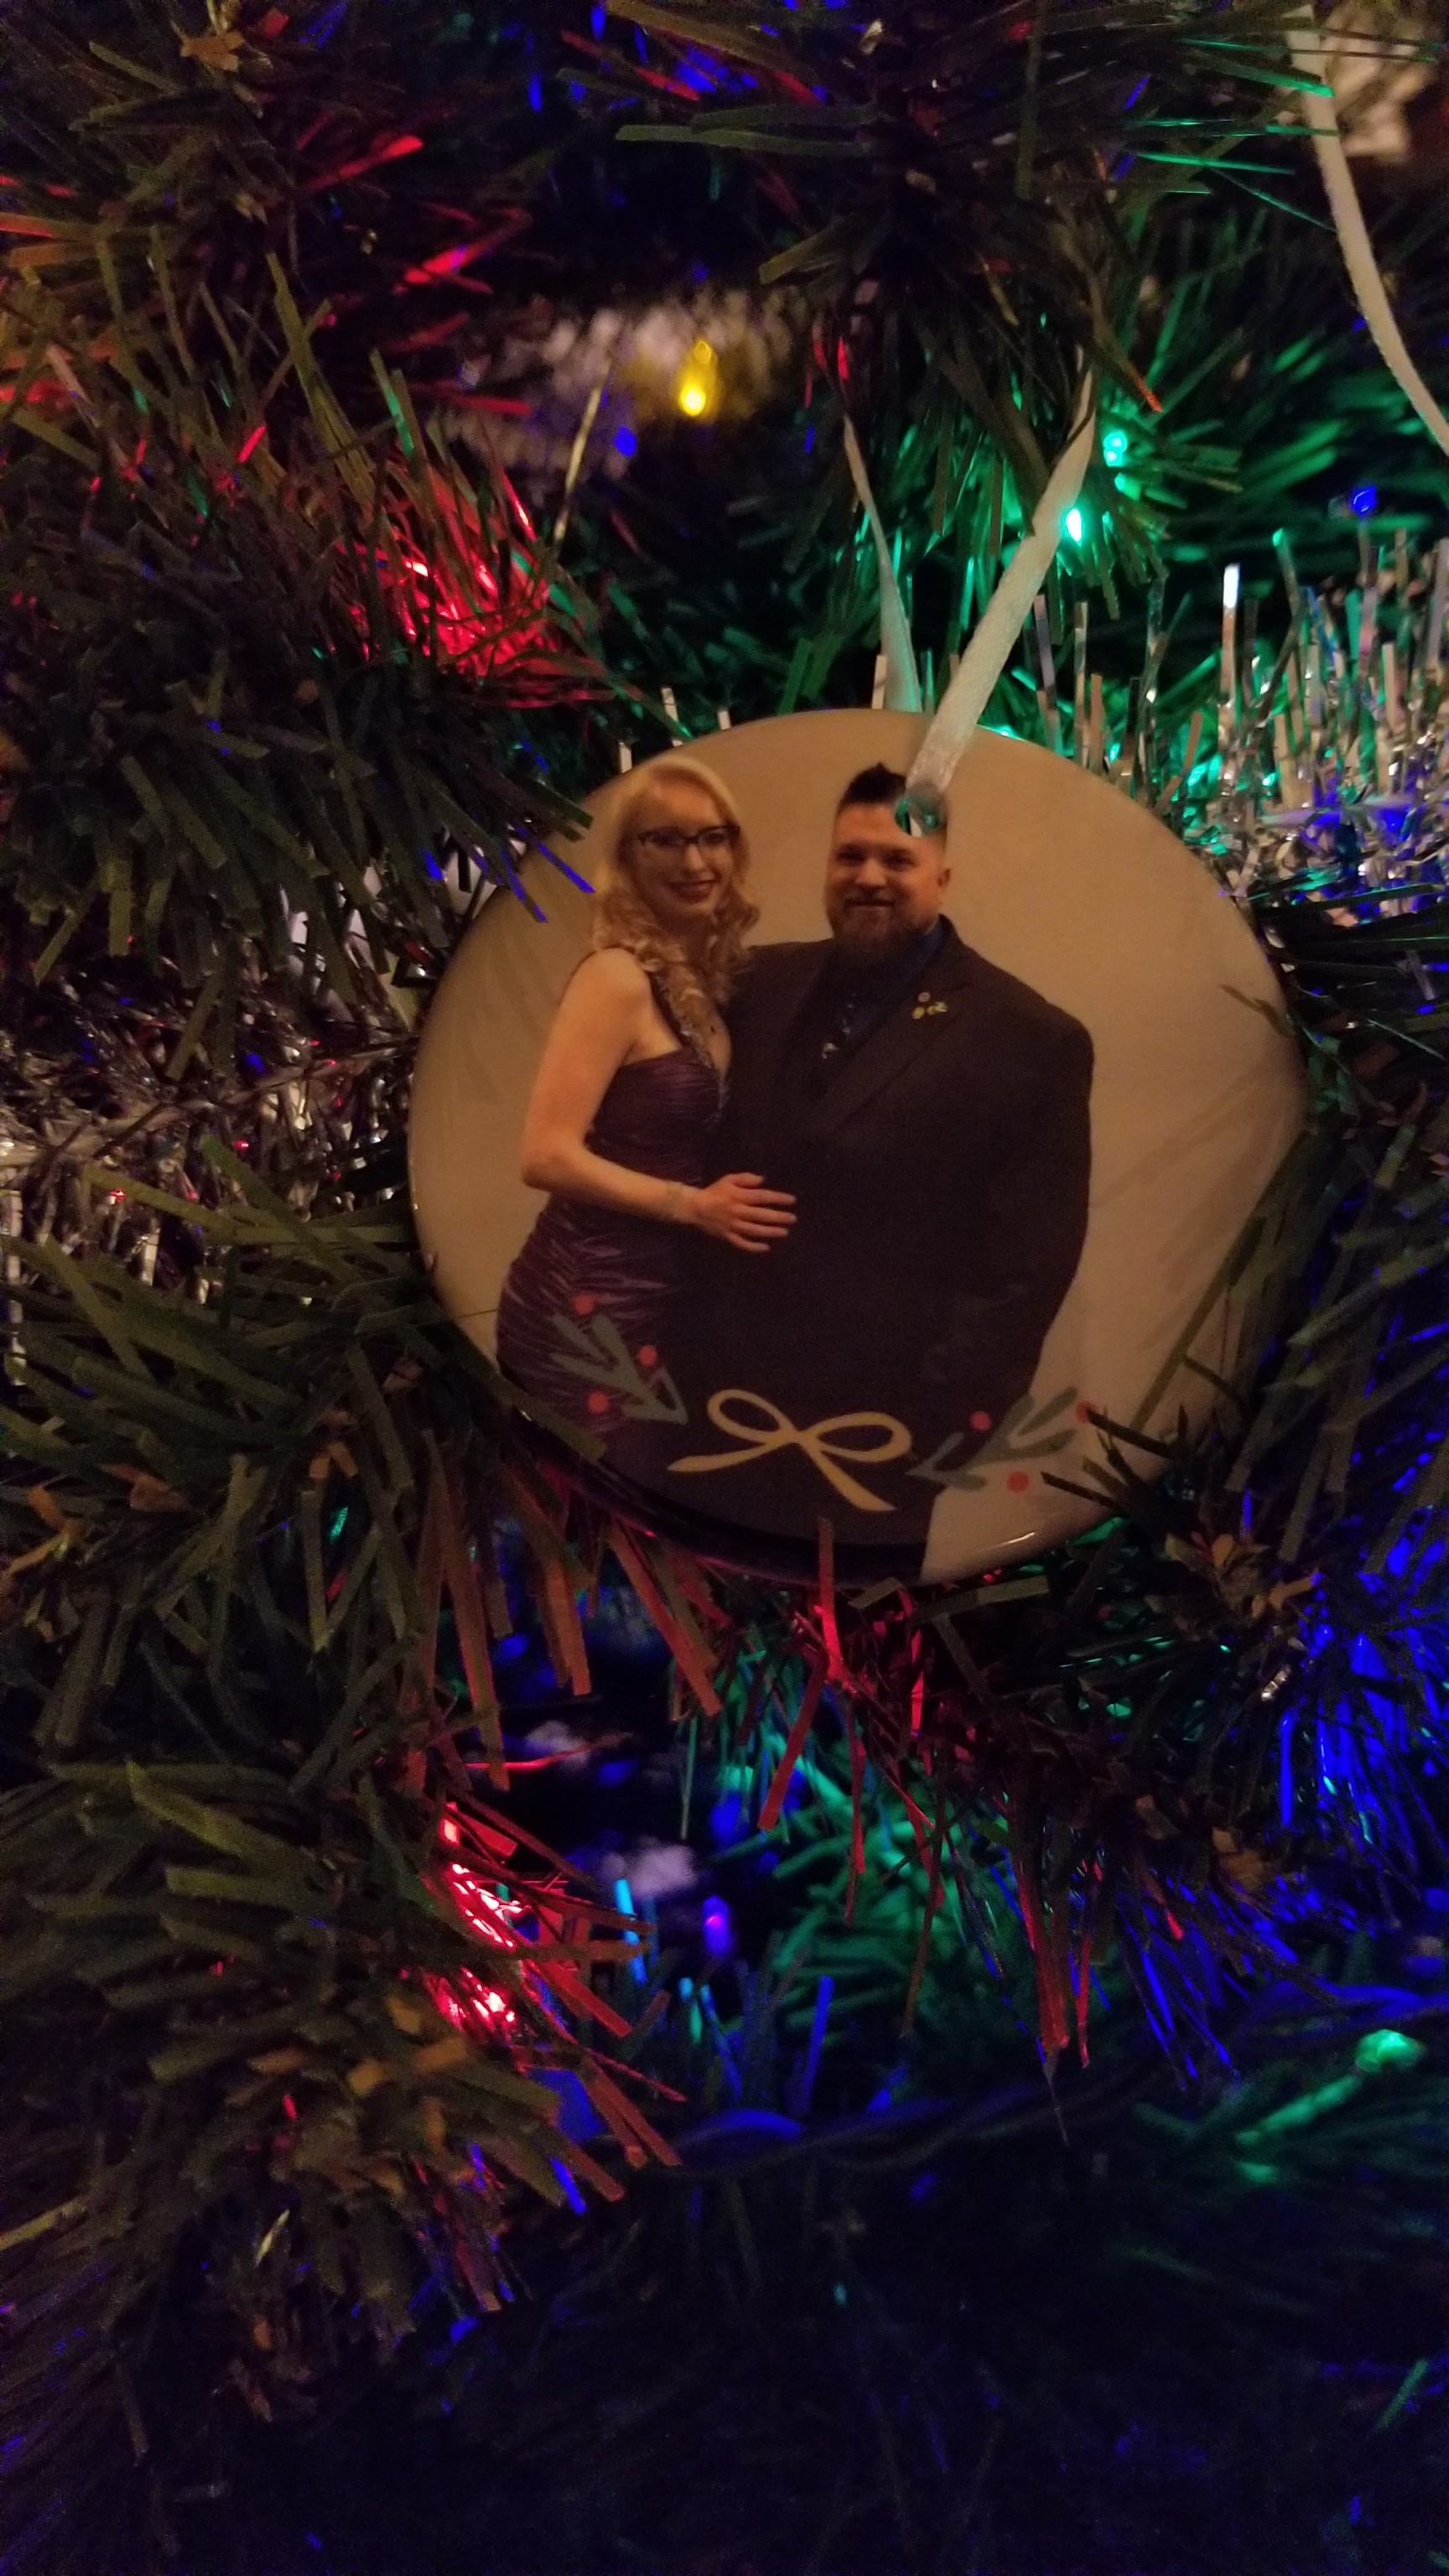 Sex katiiie-lynn:Finally finished decorating pictures